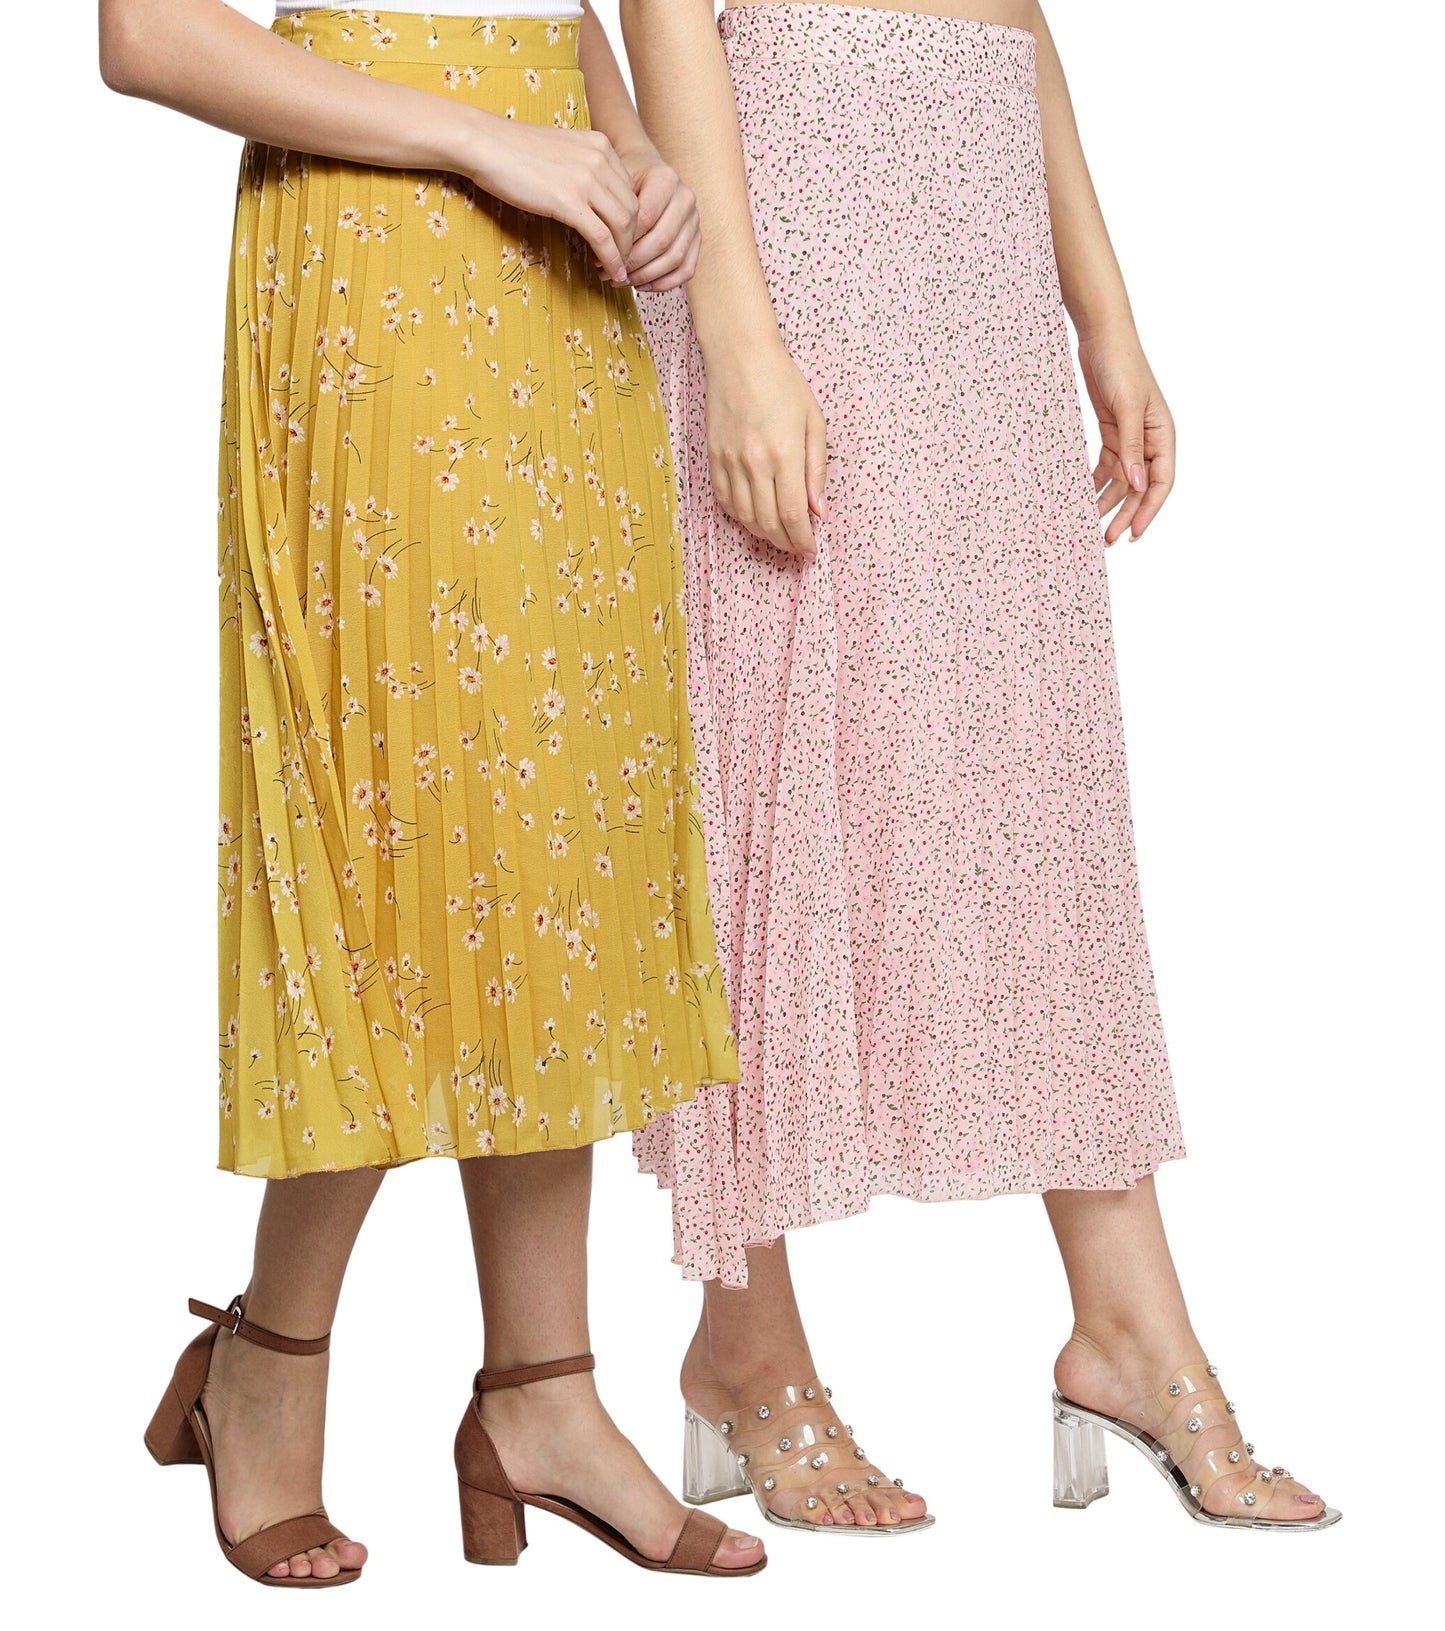 NUEVOSDAMAS Women Georgette Floral Printed Skirts-Pack of Two-Pink and Yellow